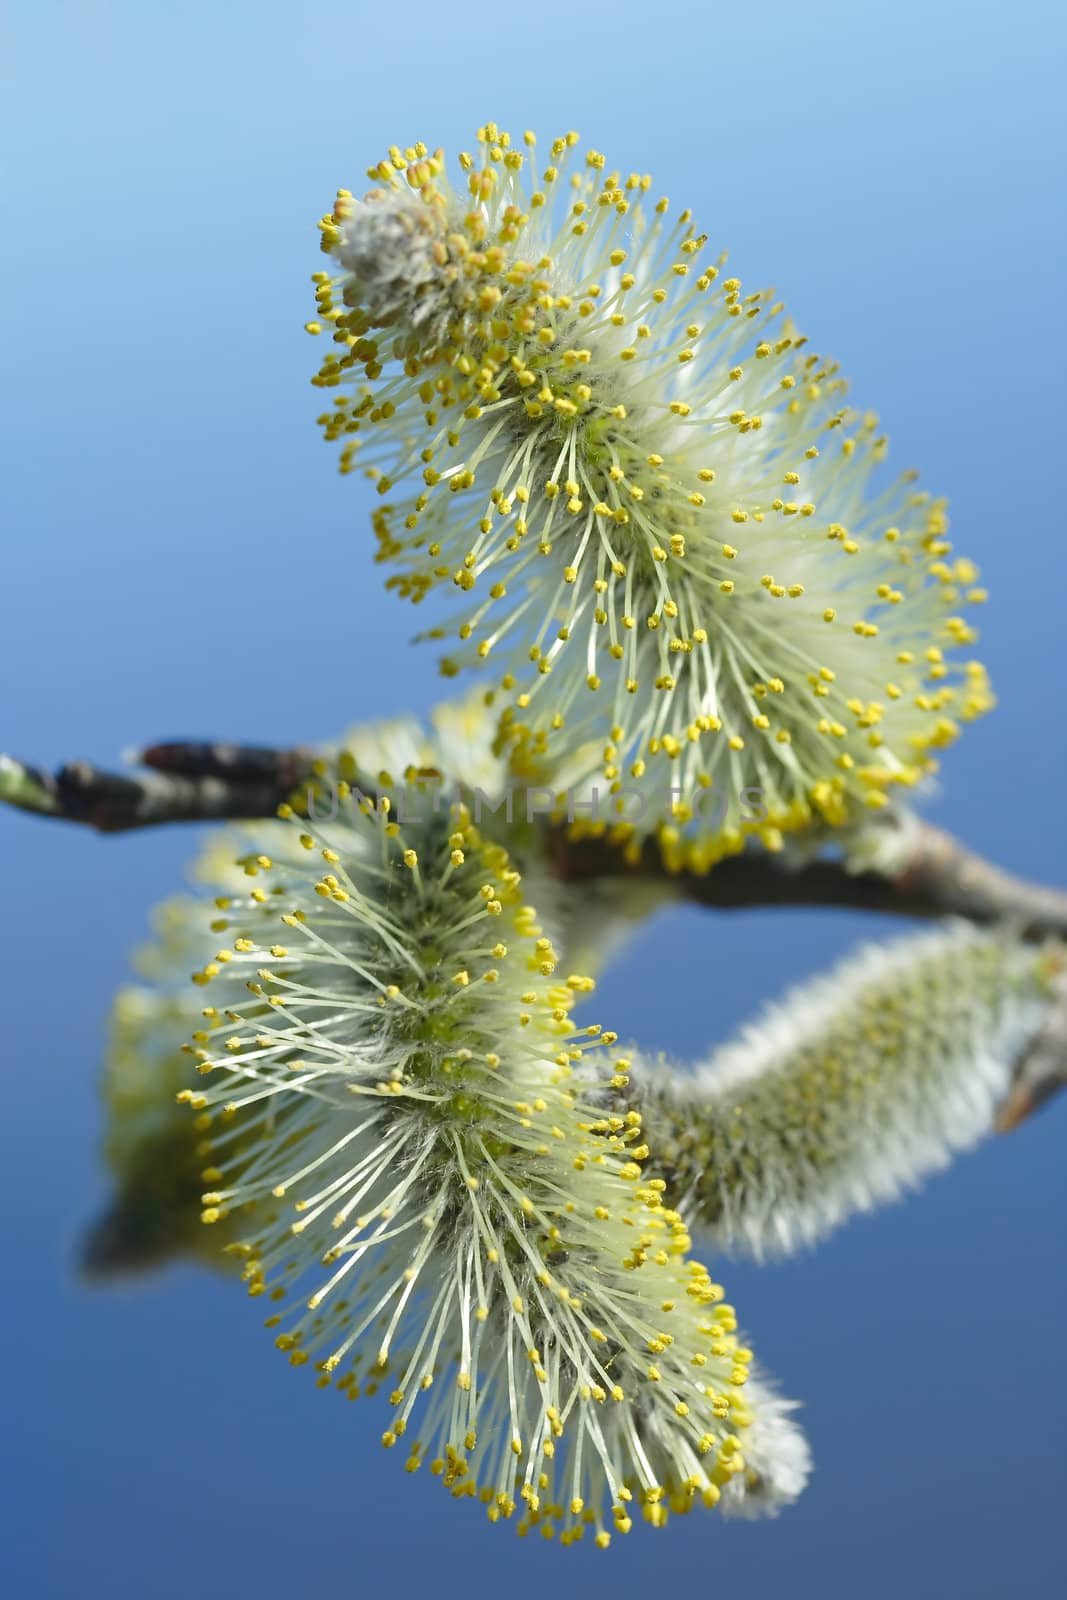 First hairy willow catkins in spring